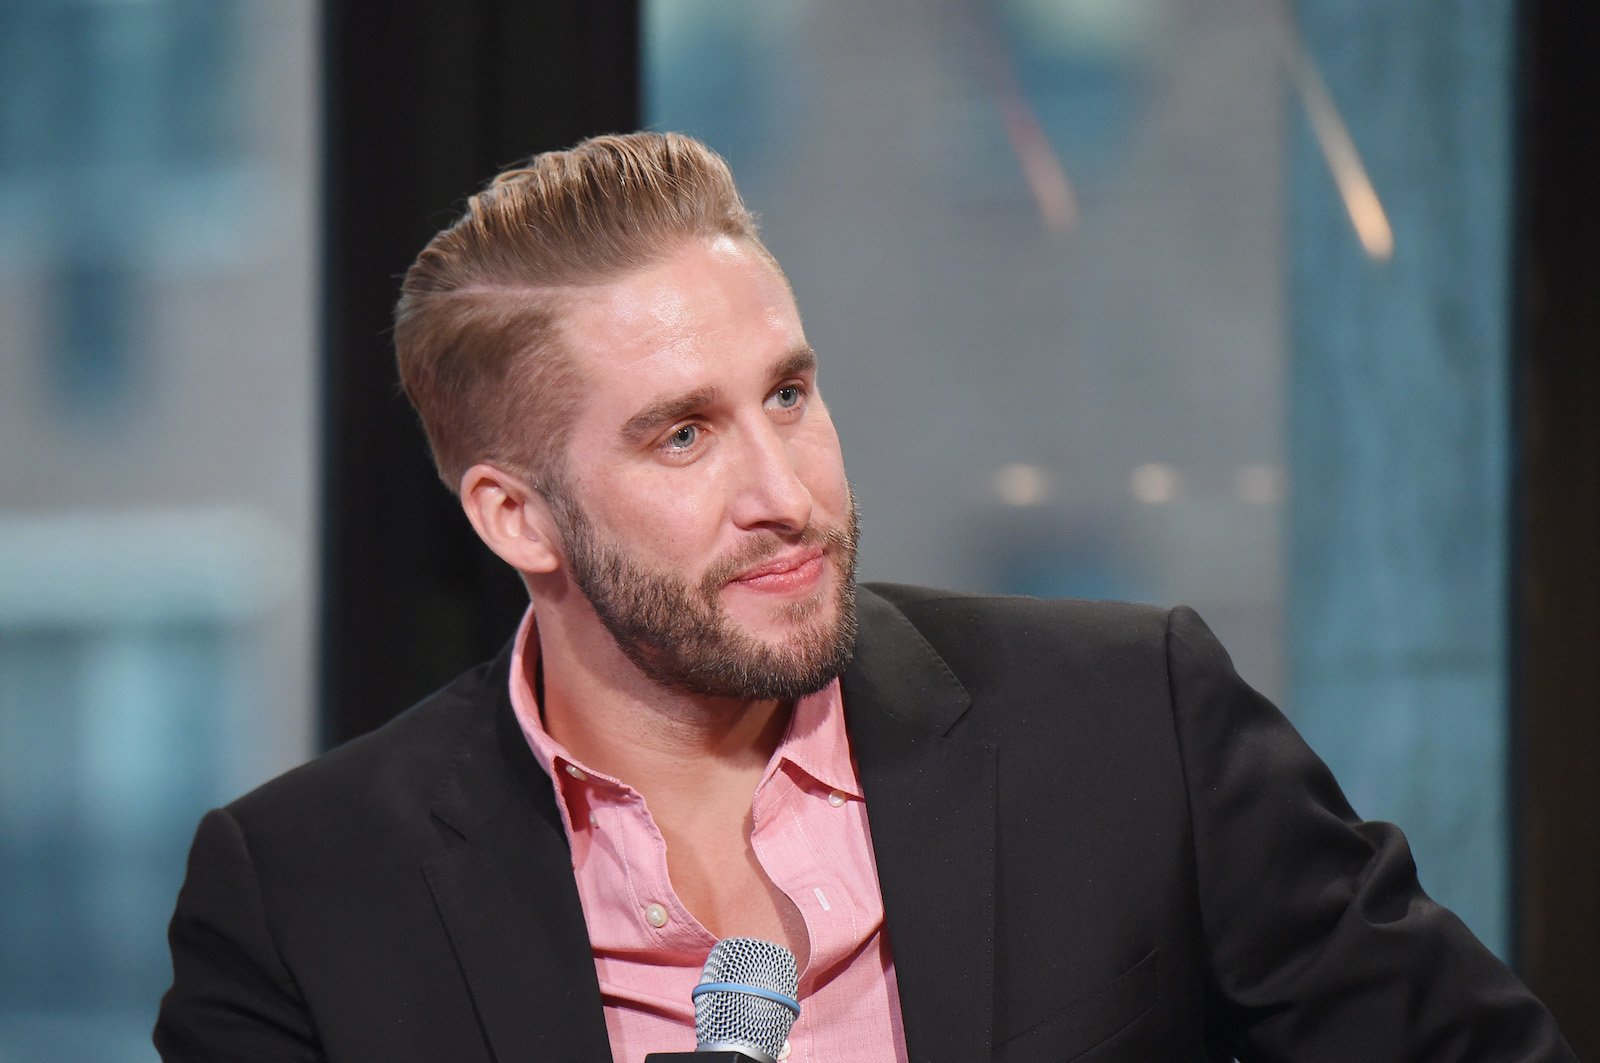 Shawn Booth from The Bachelorette attends the 2015 AOL BUILD Speaker Series